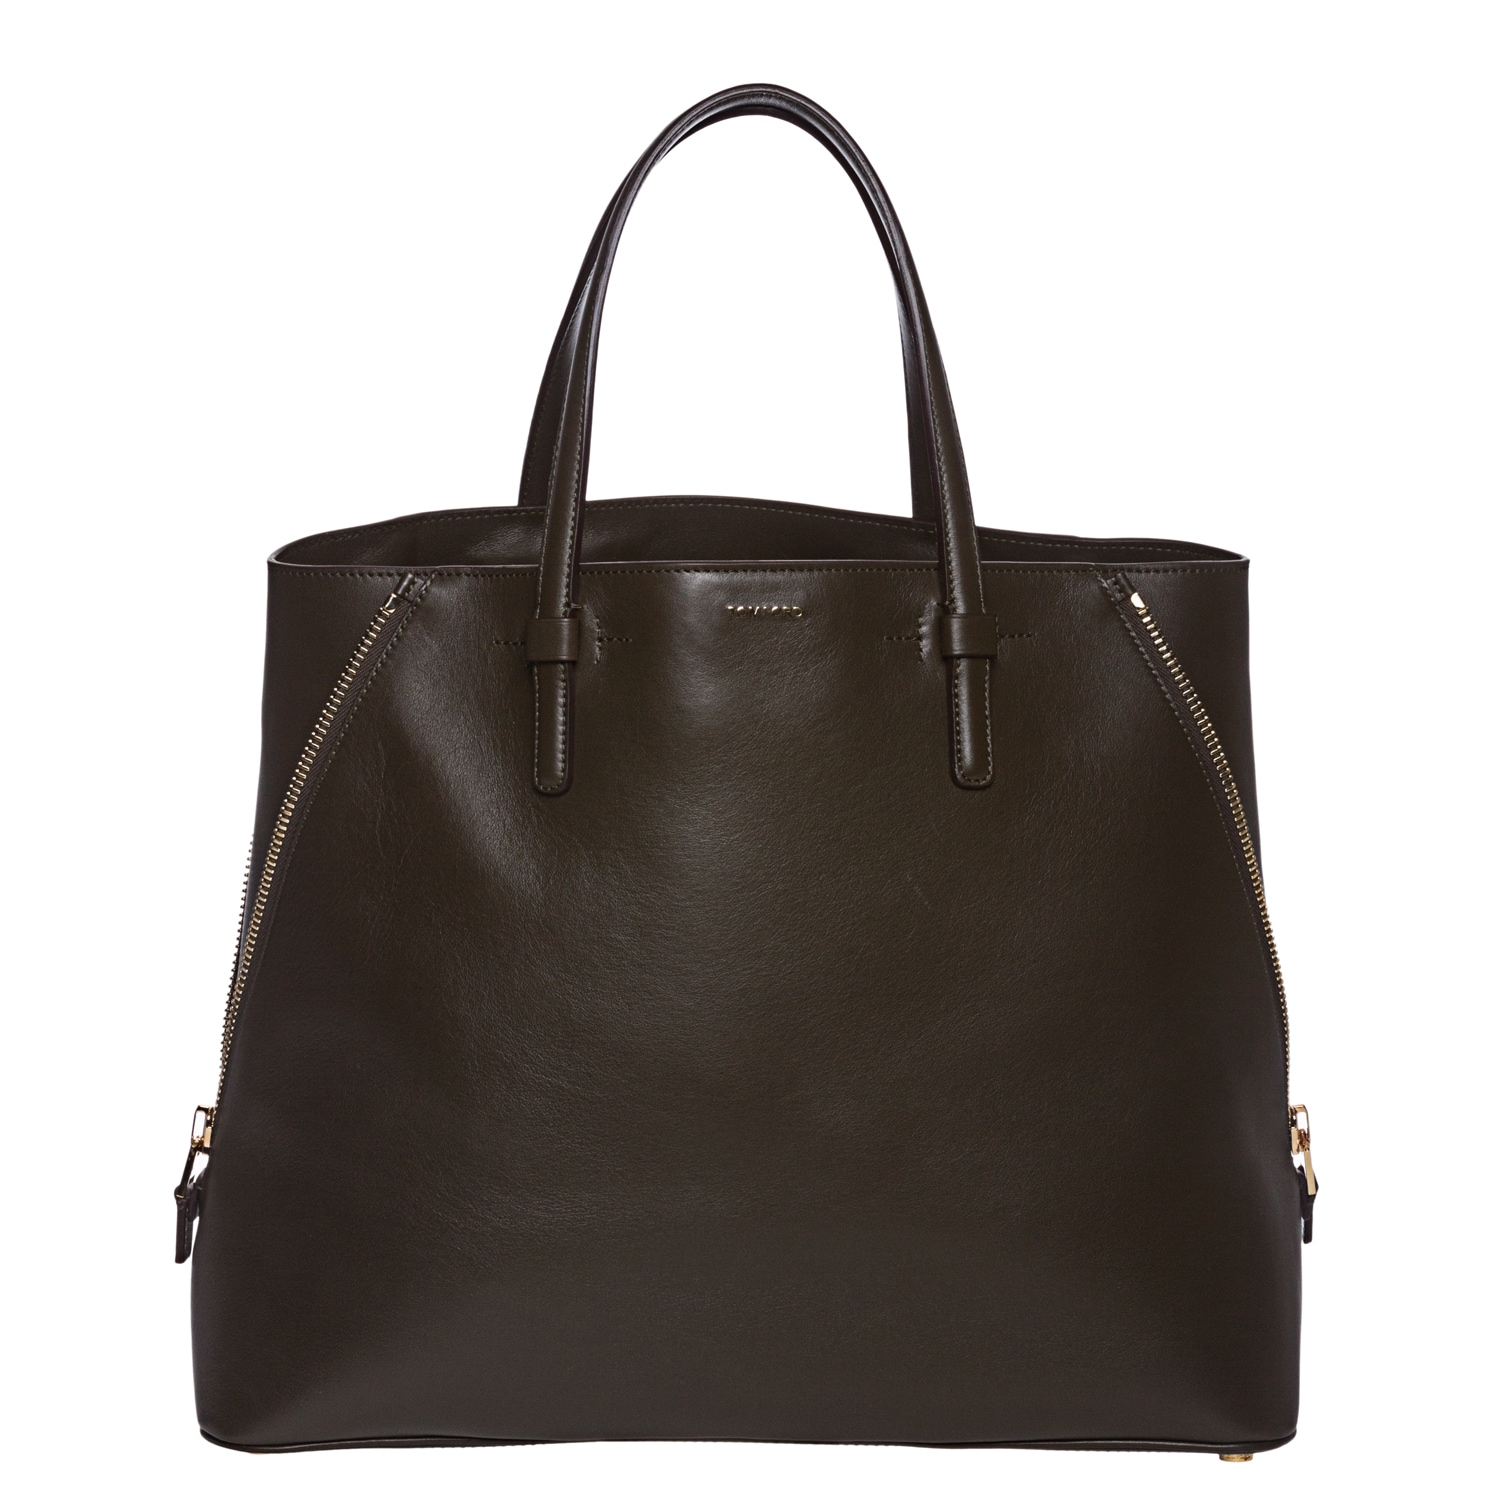 Tom Ford Chocolate Leather Side Zip Tote Bag